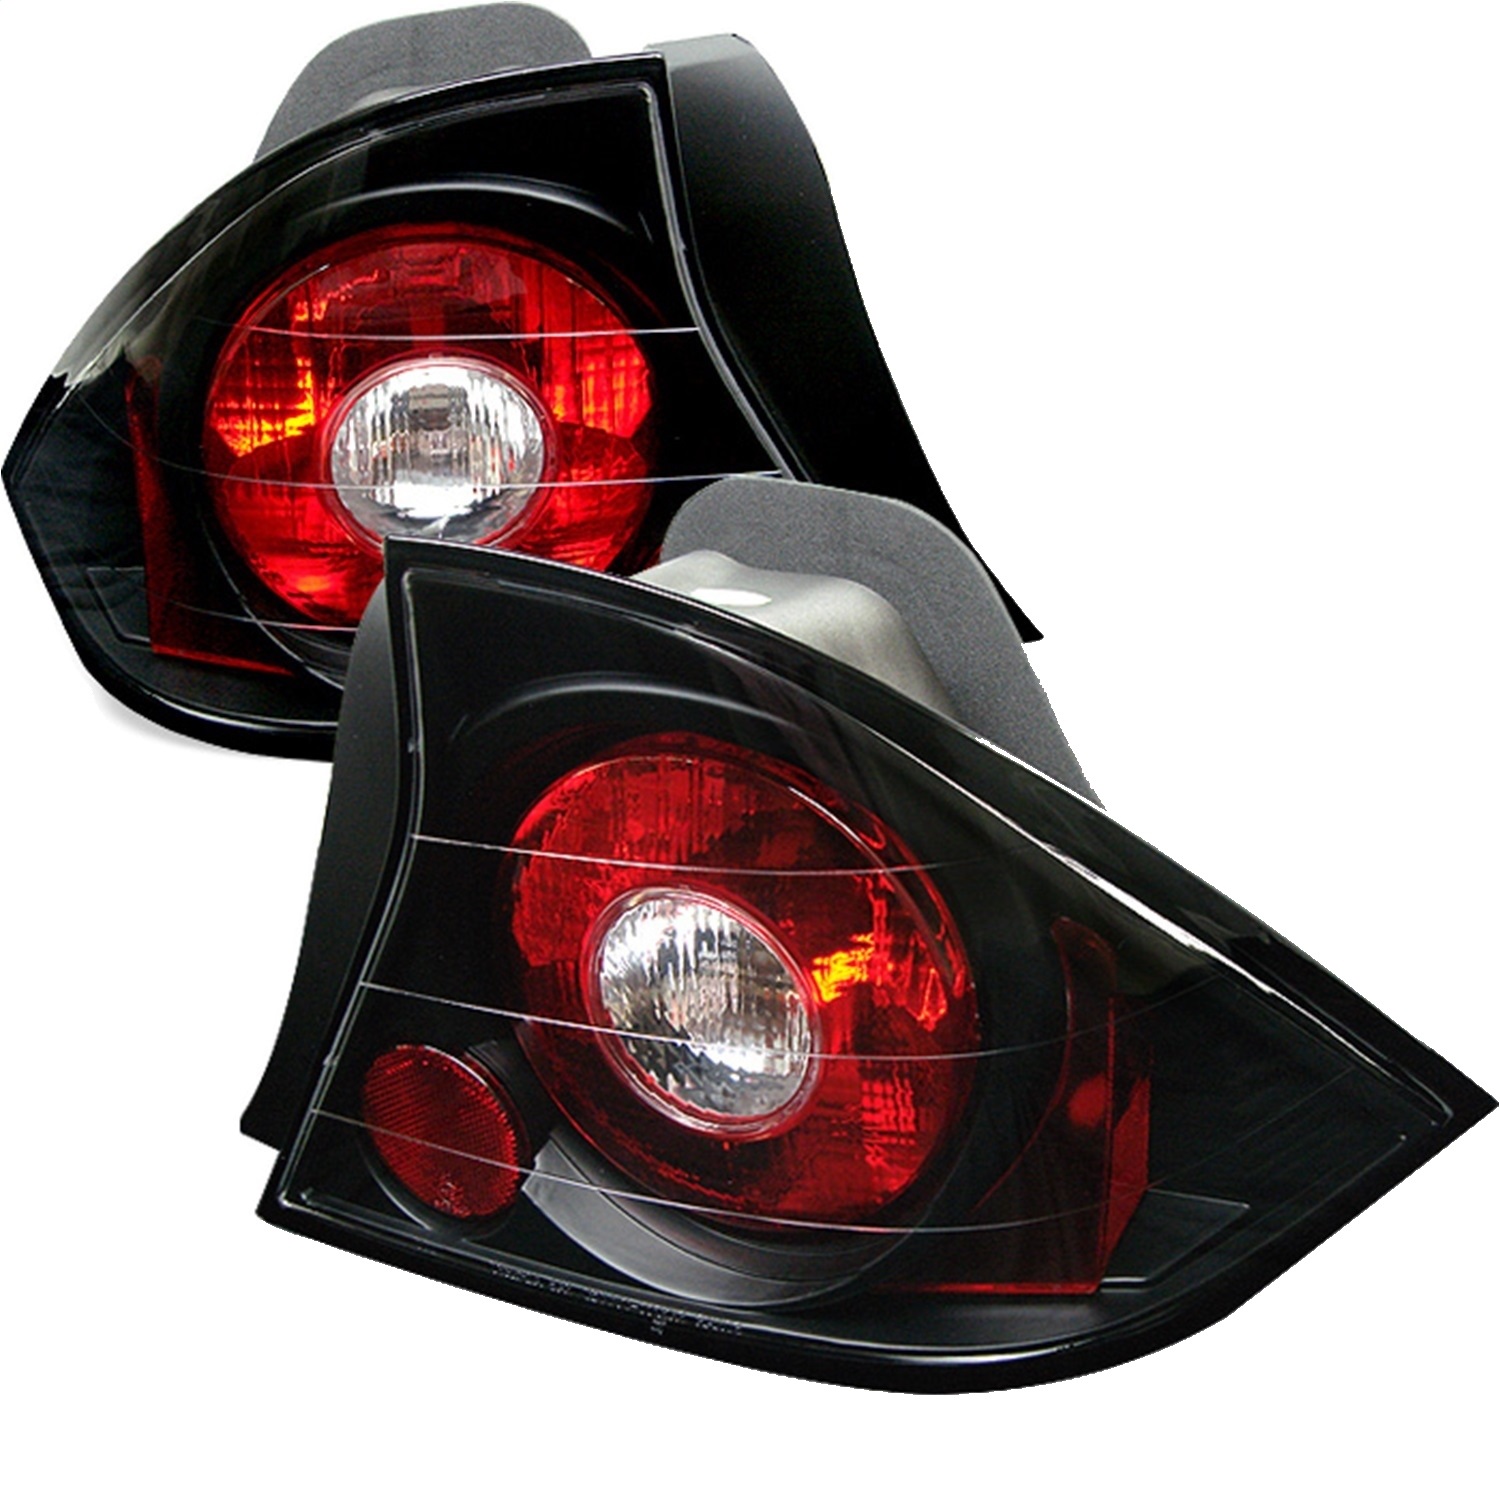 Spyder Auto 5004369 Euro Style Tail Lights Fits 01-03 Civic